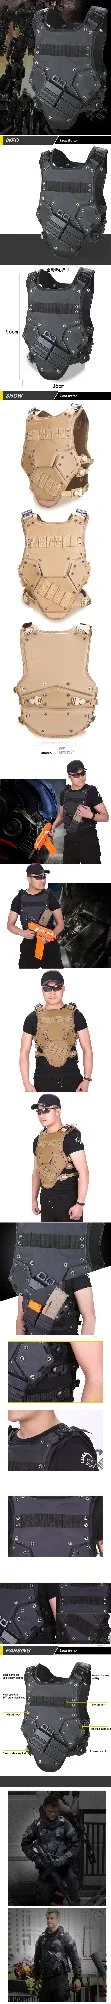 Black Transformers Tactical Vest Security Outdoor Training Fighting Armor CS Field Protective Vest